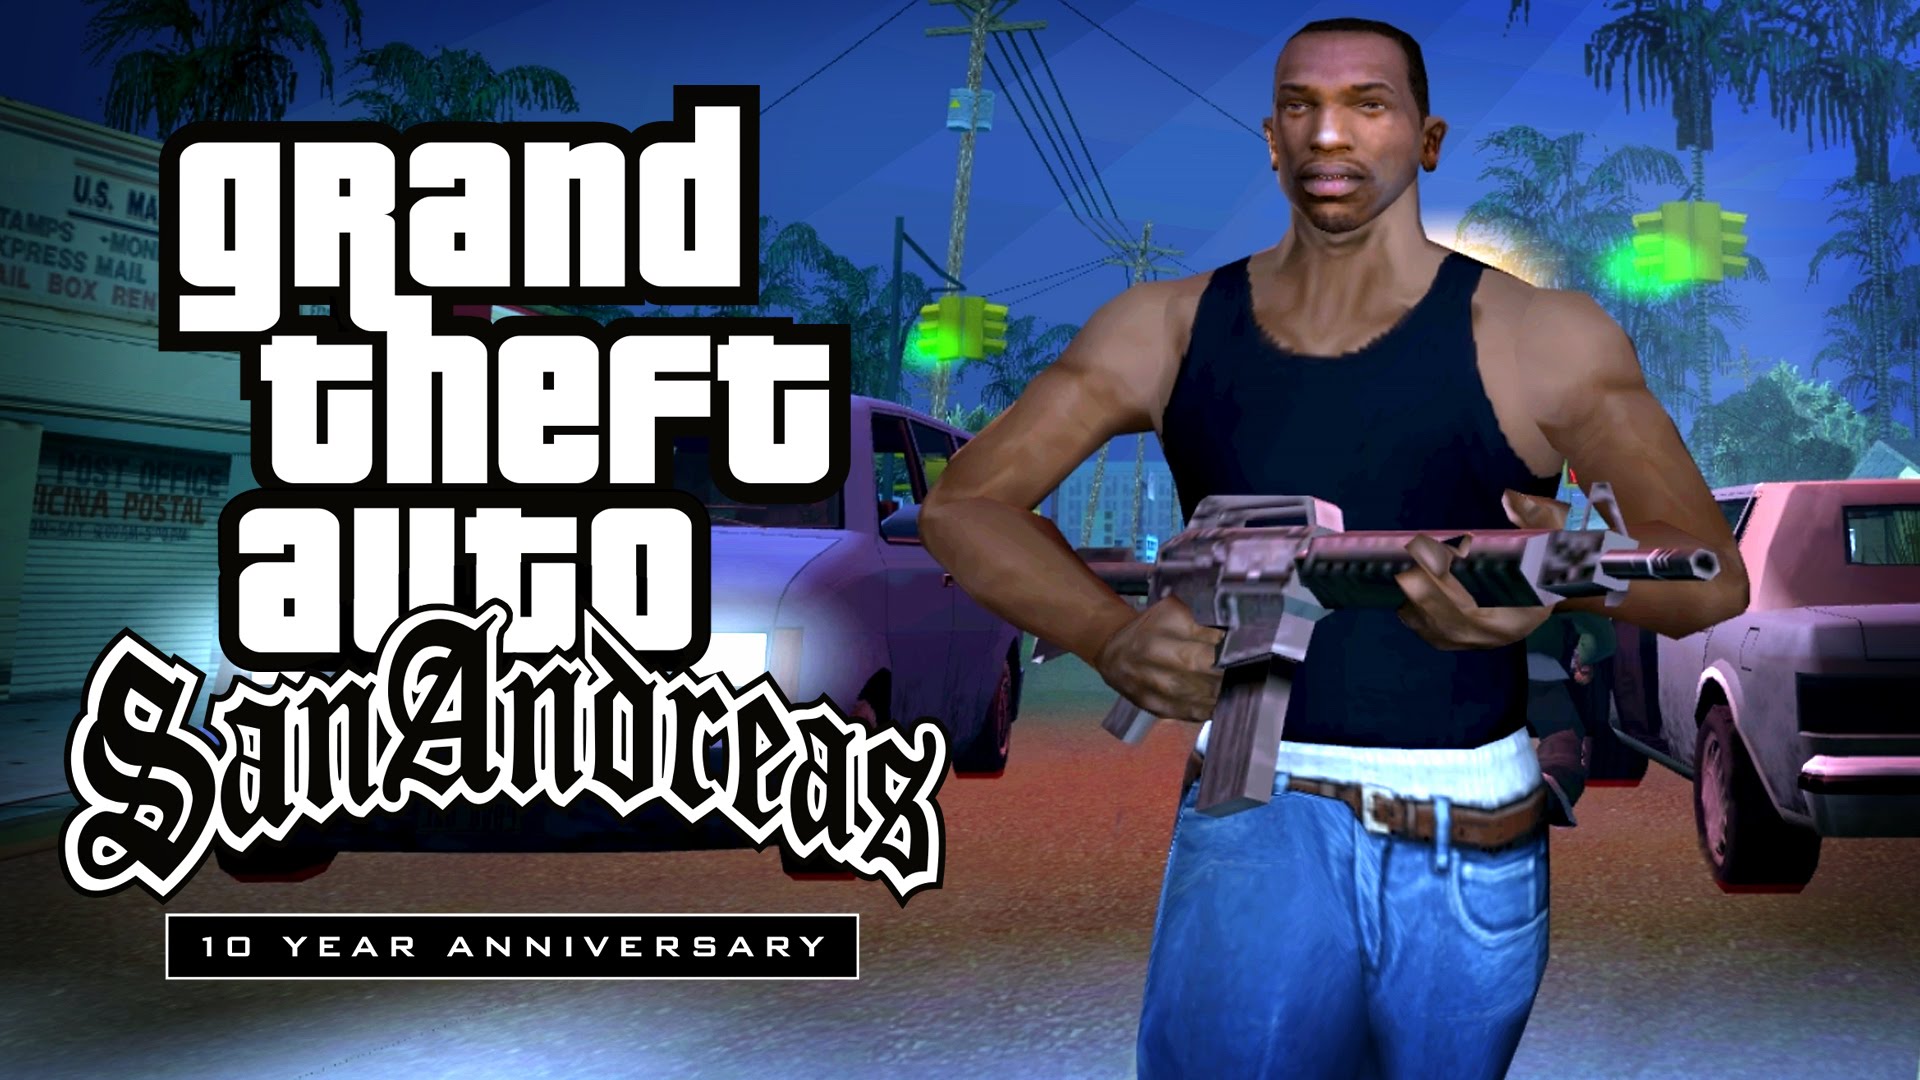 Grand Theft Auto: San Andreas Images - Game Retina